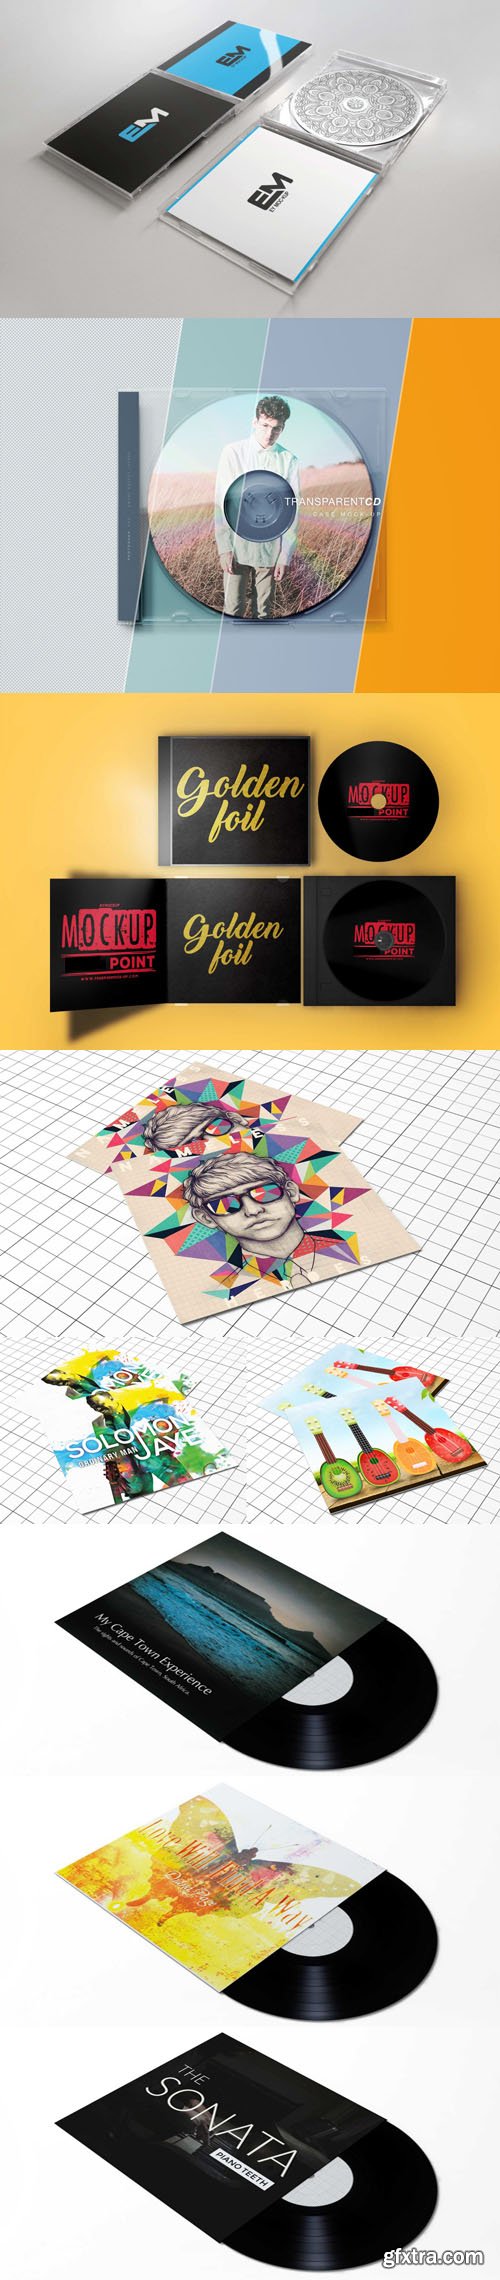 CD/DVD Covers PSD Mockups Collection